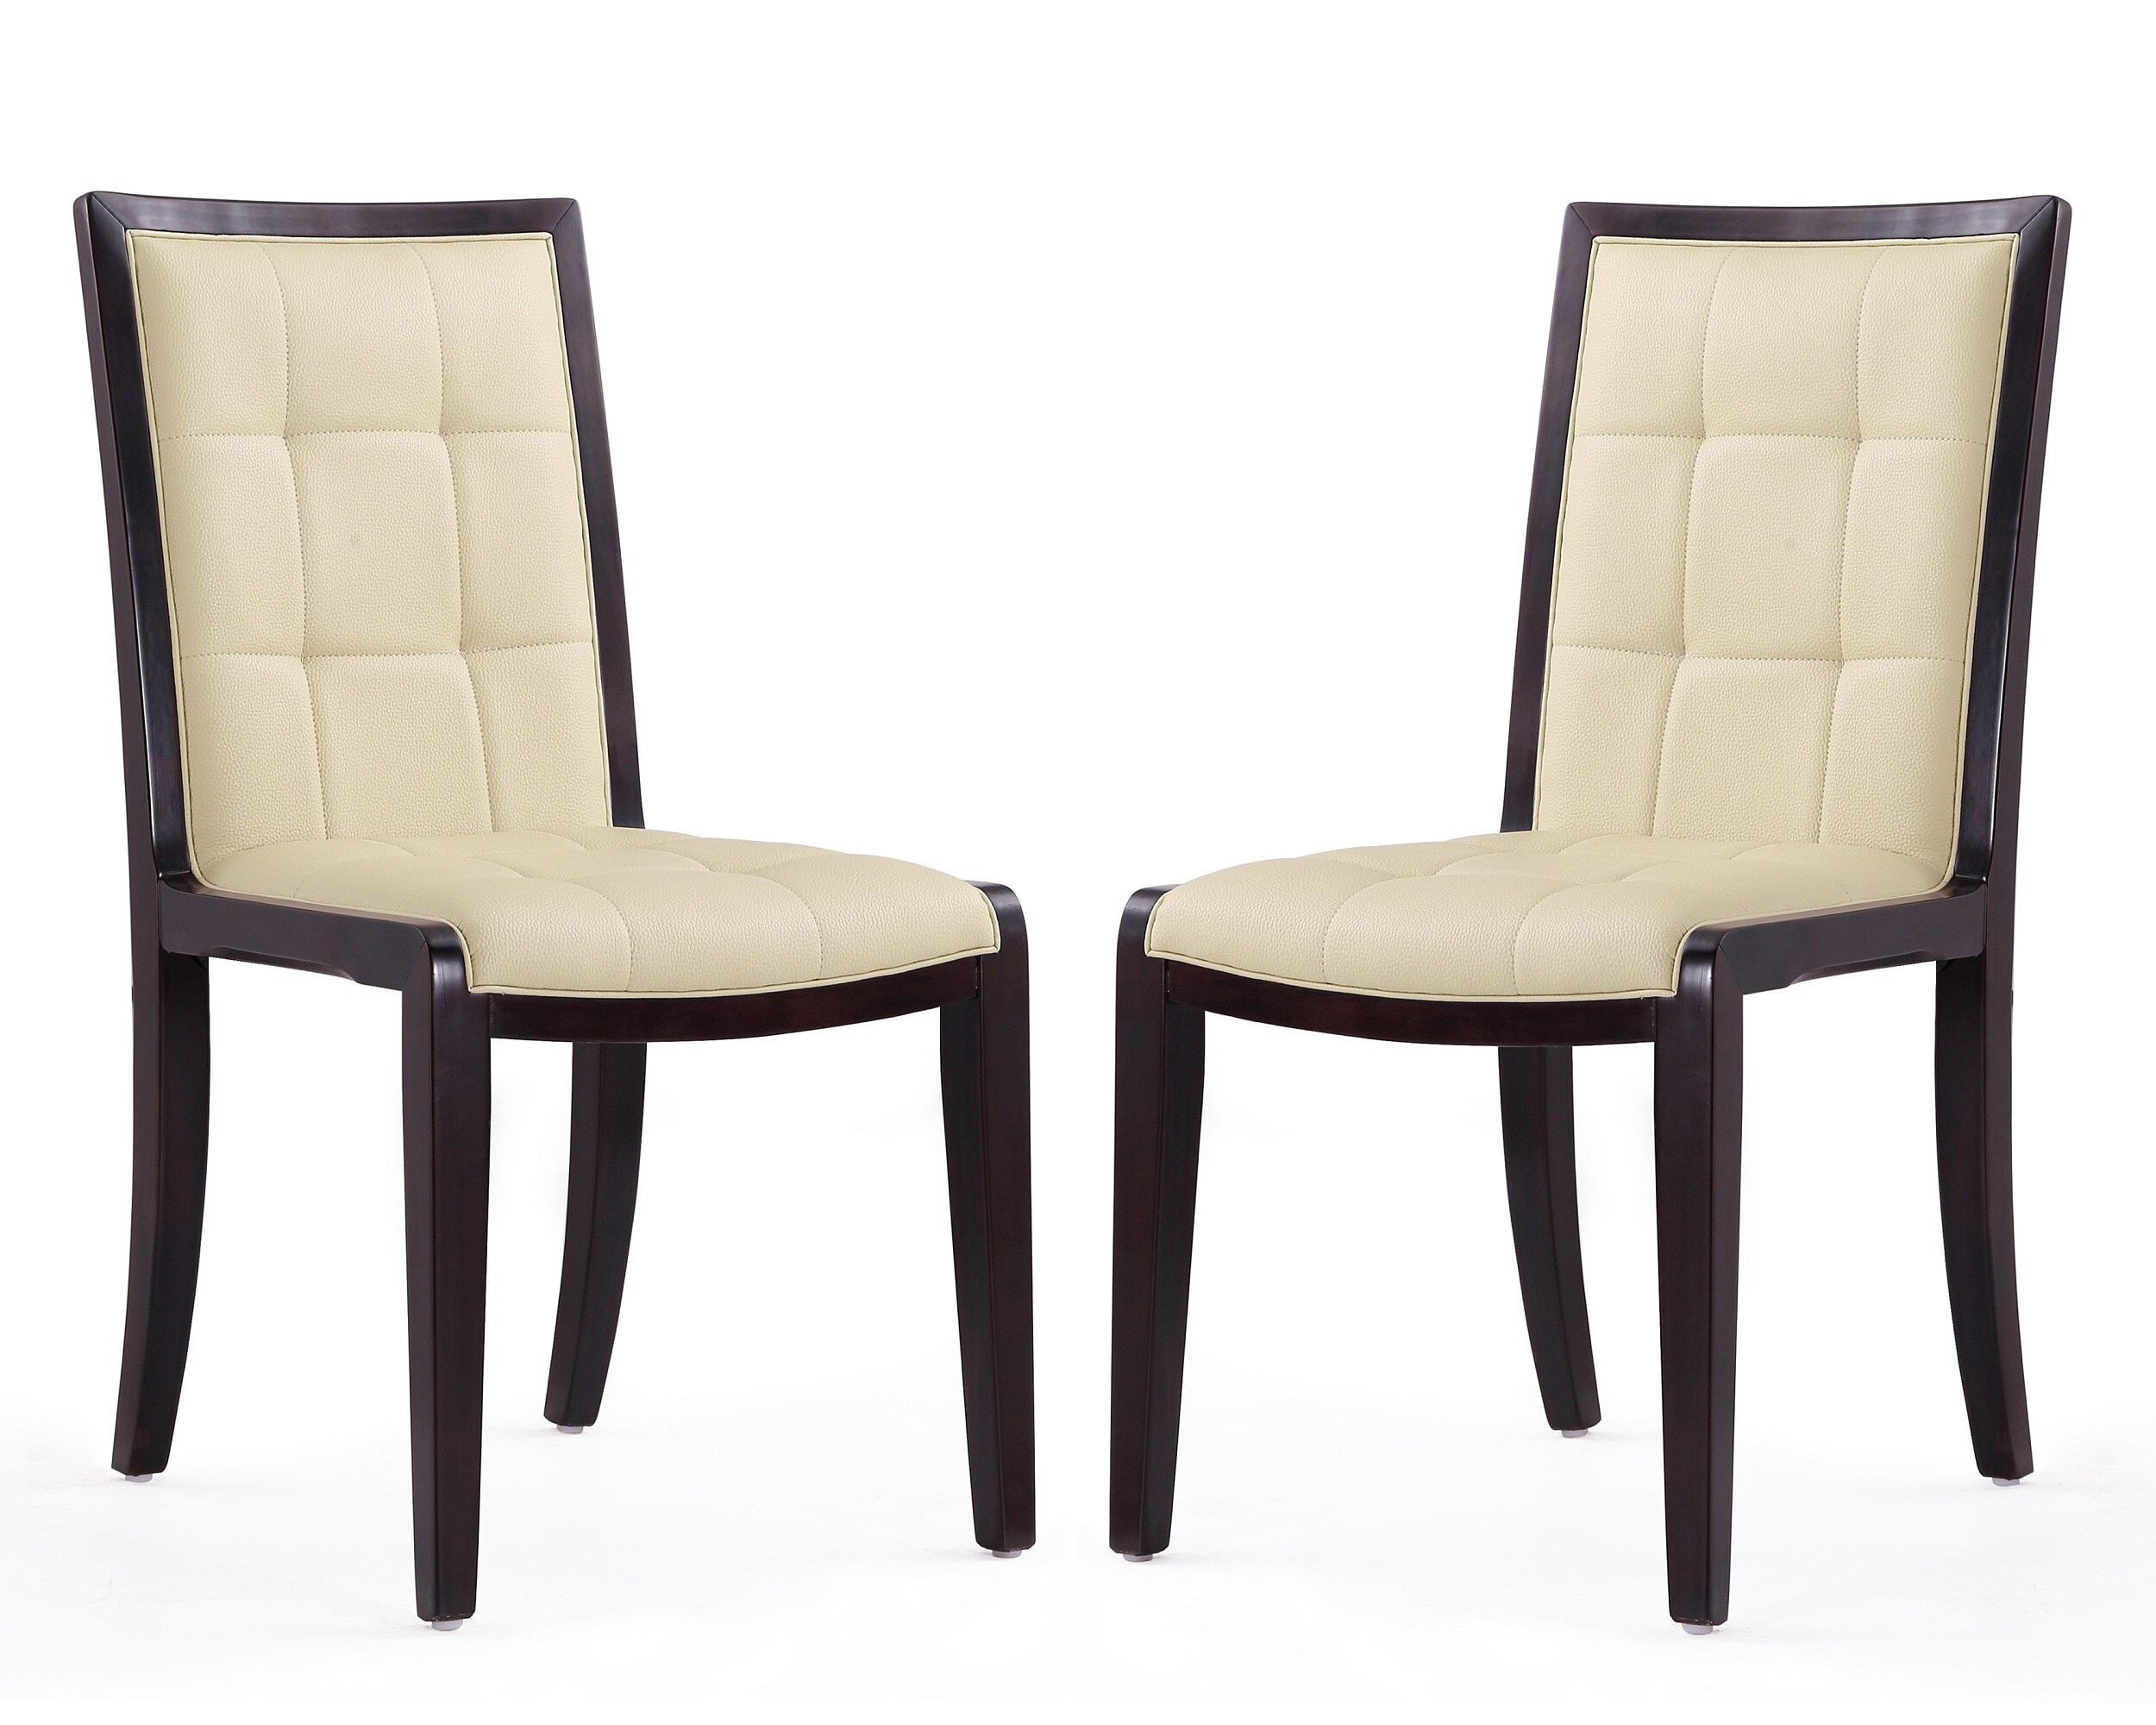 Manhattan Comfort Fifth Avenue Cream and Walnut Faux Leather Dining Chair (Set of Two)